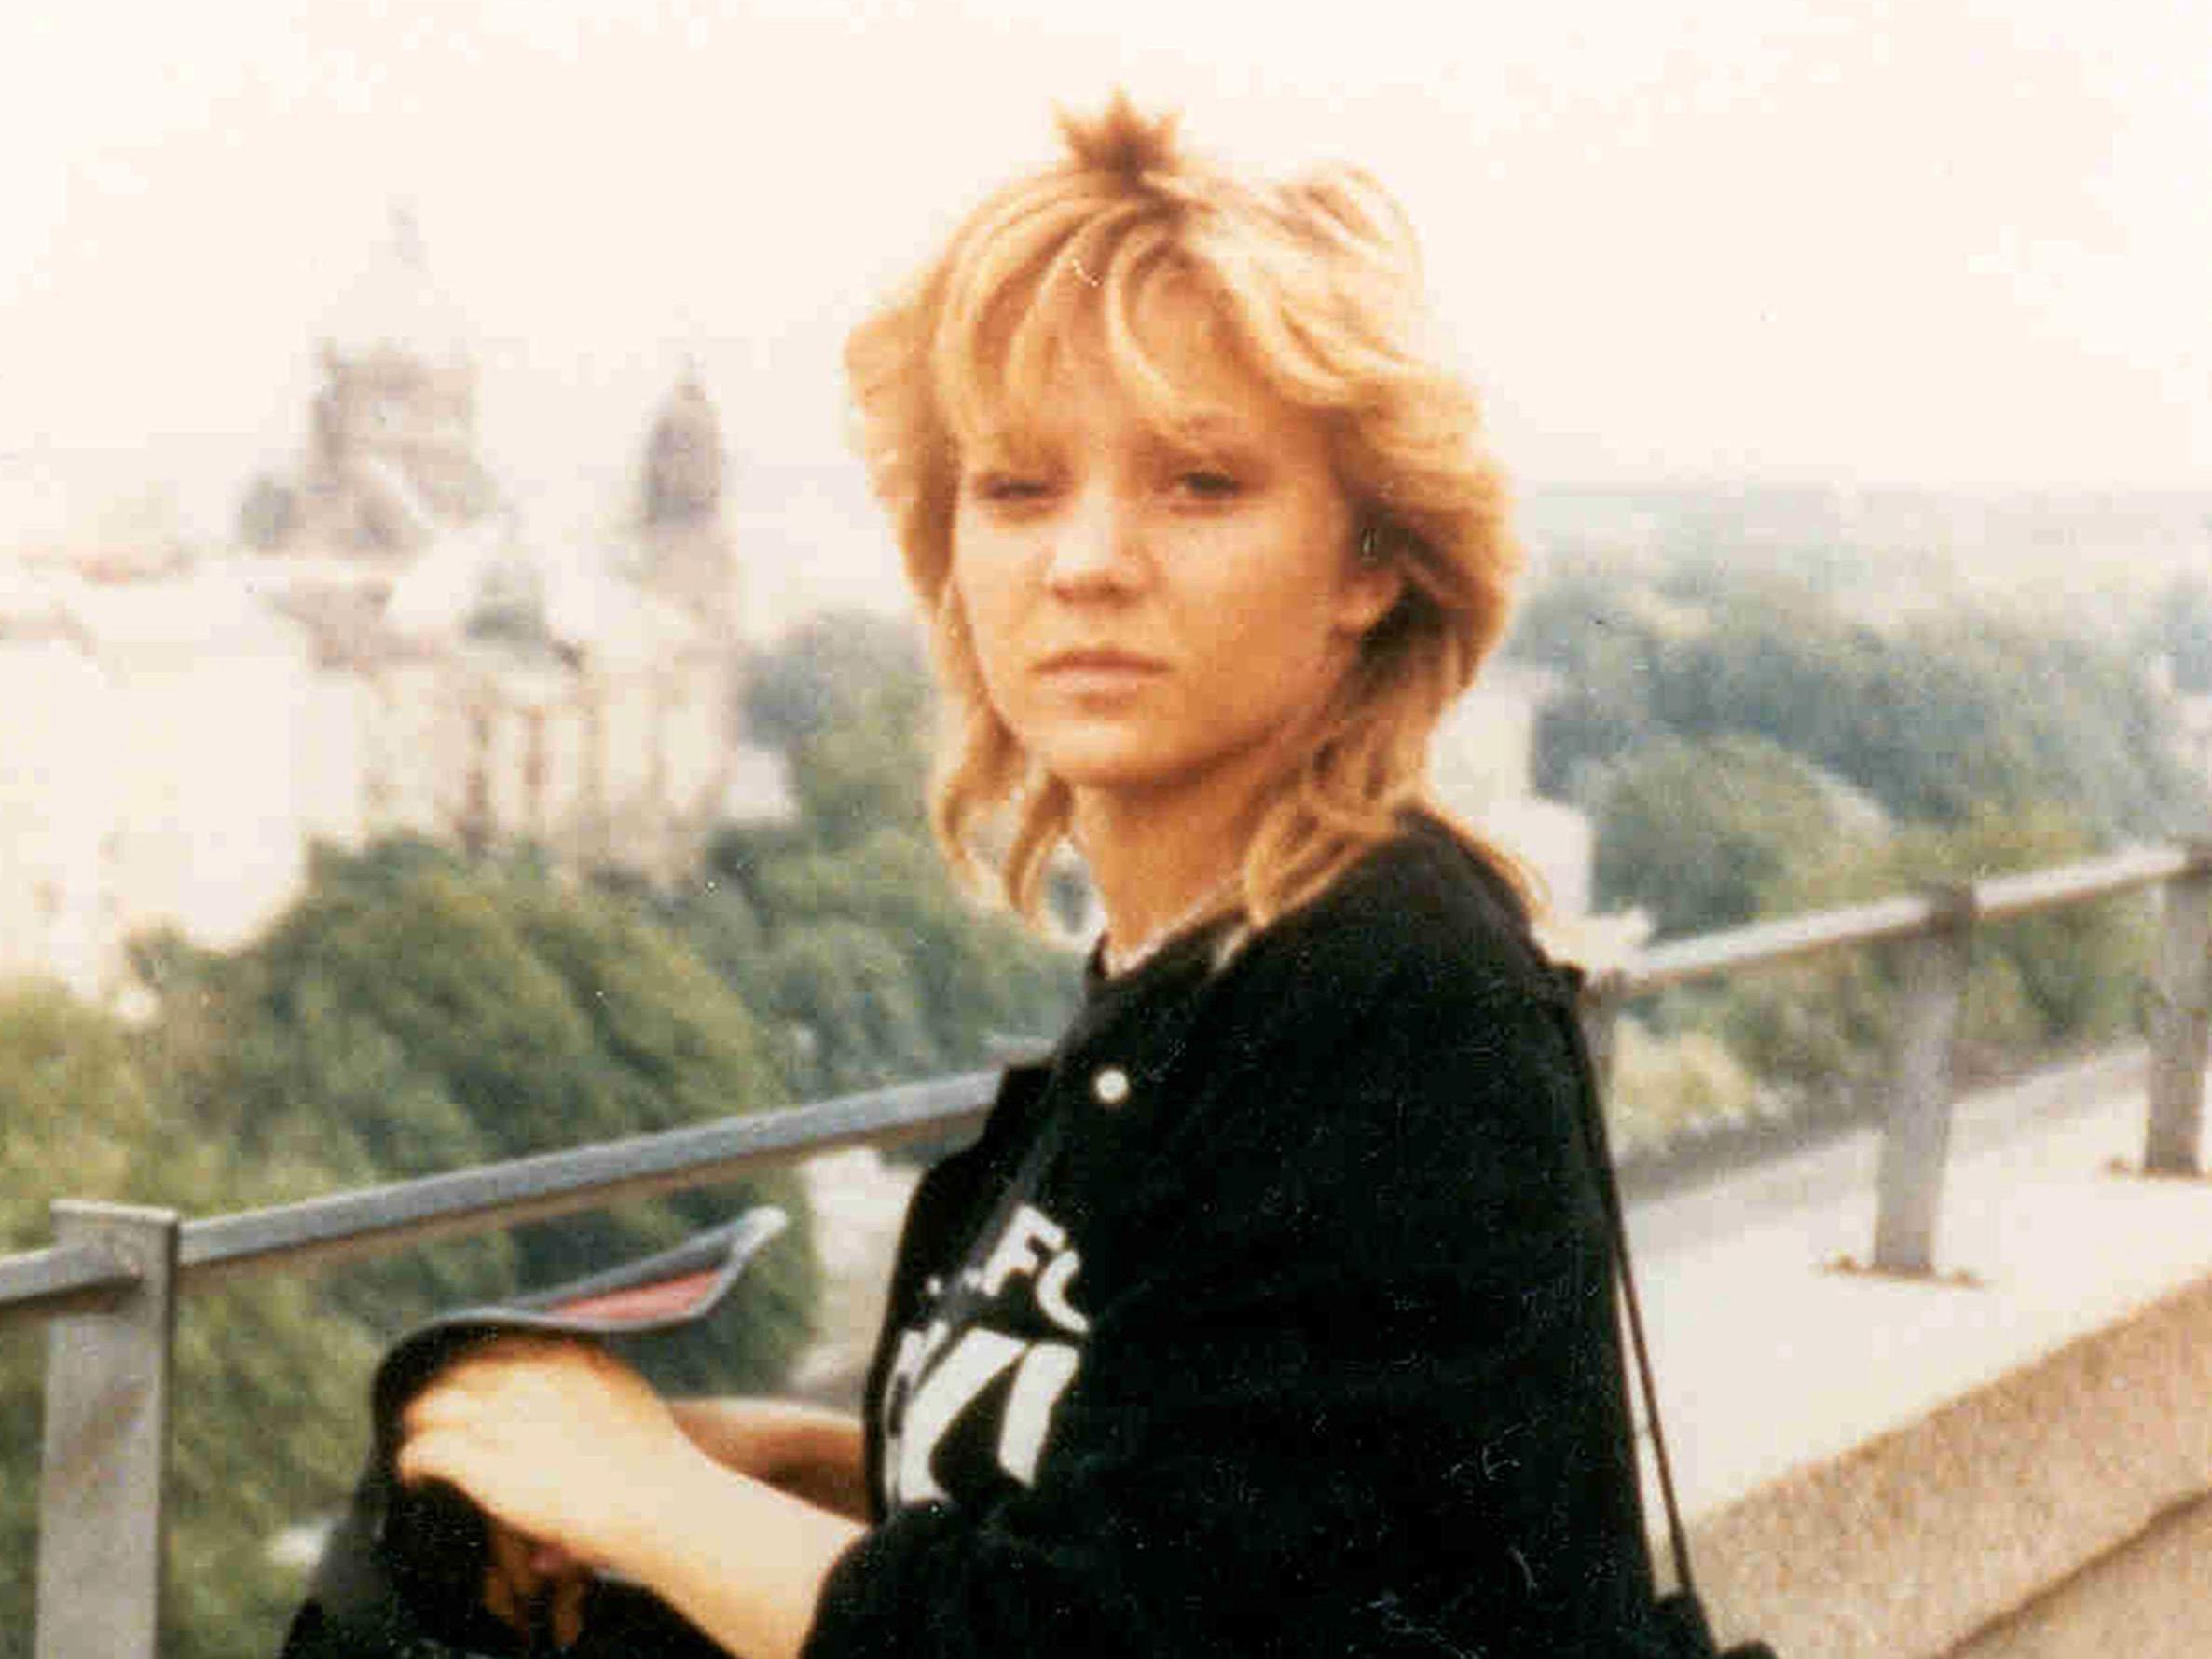 Inga Maria Hauser was found murdered in Ballypatrick Forest, County Antrim, in April 1988